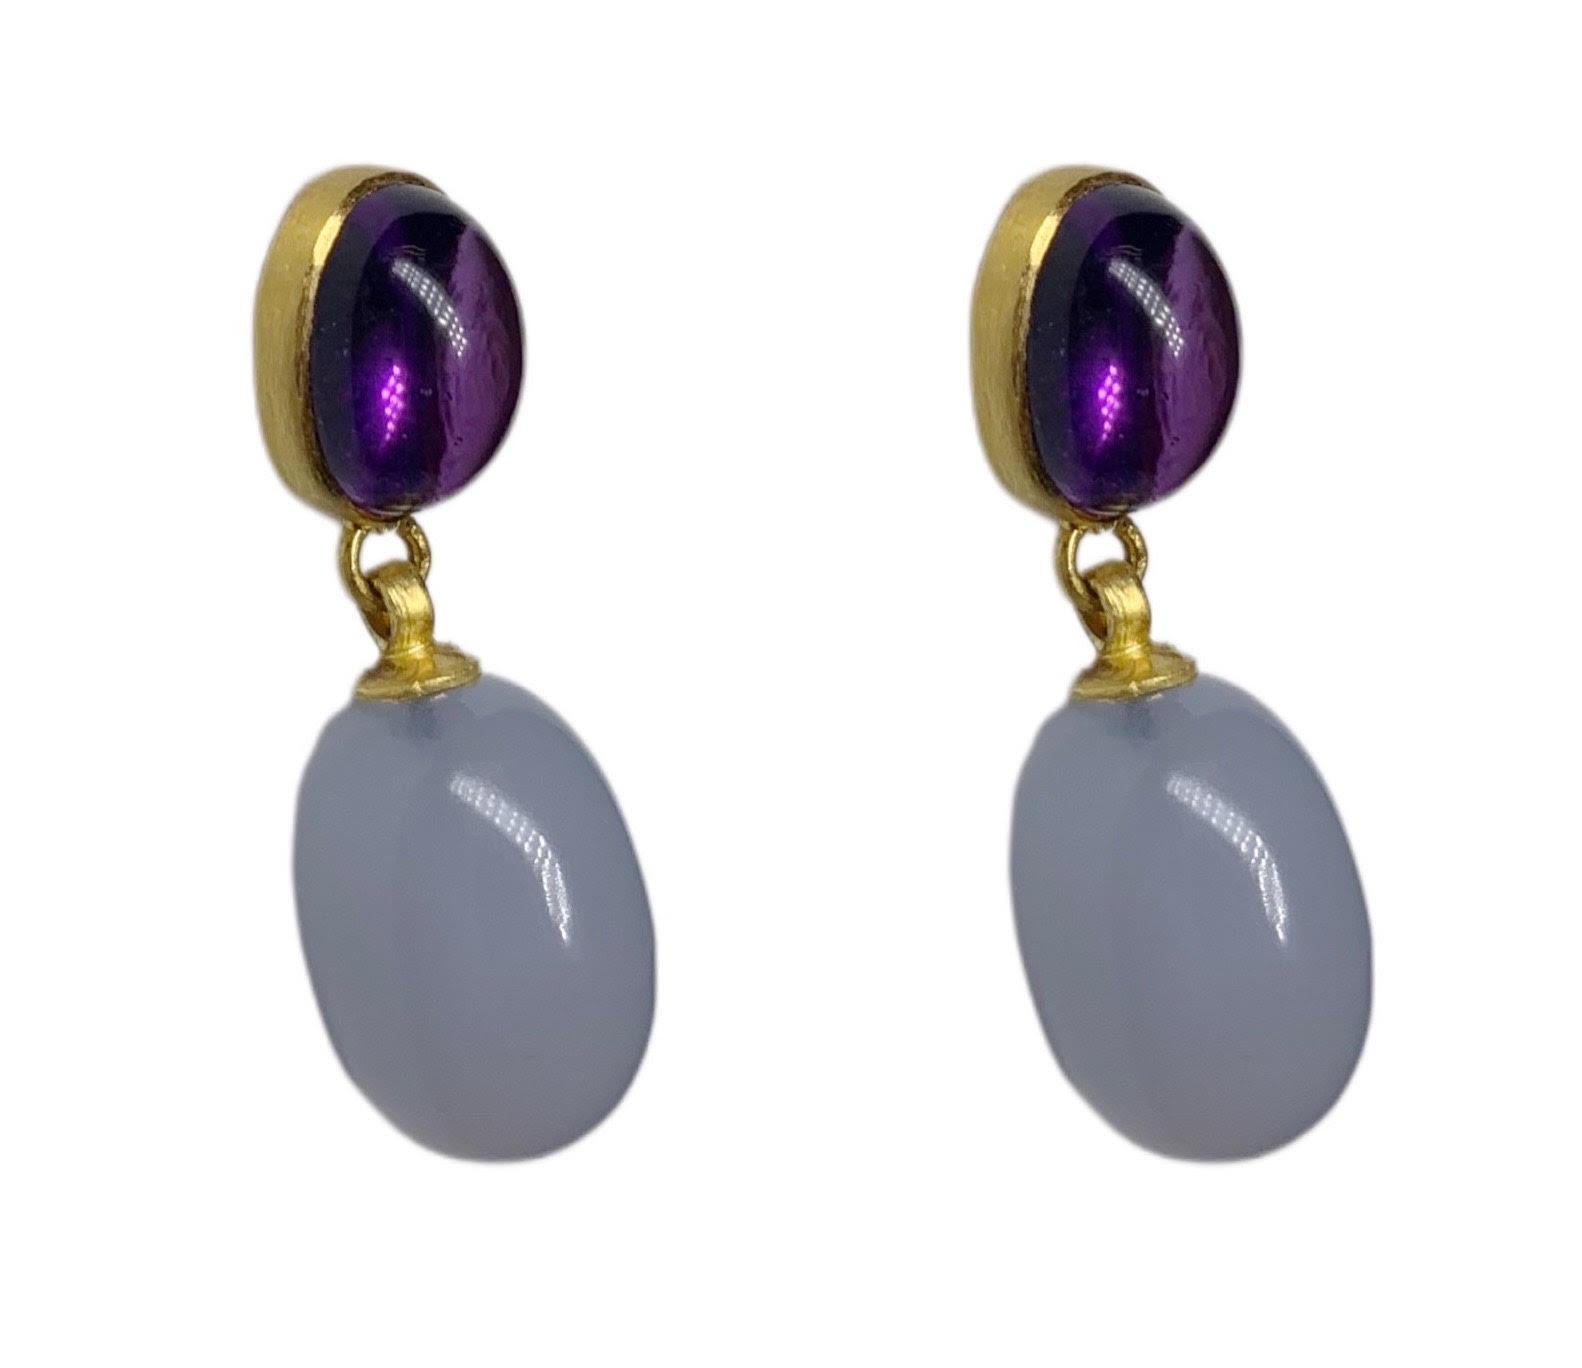 These stunning 6.35 carat Amethyst and 20.90 carat Chalcedony dangling earrings have soft 18 Karat Yellow Gold smooth finish. 

A2 by Arunashi Amethyst and Chalcedony Dangling Earrings 
18 Karat Yellow Gold 
Amethyst weighing 6.35 carats
Chalcedony